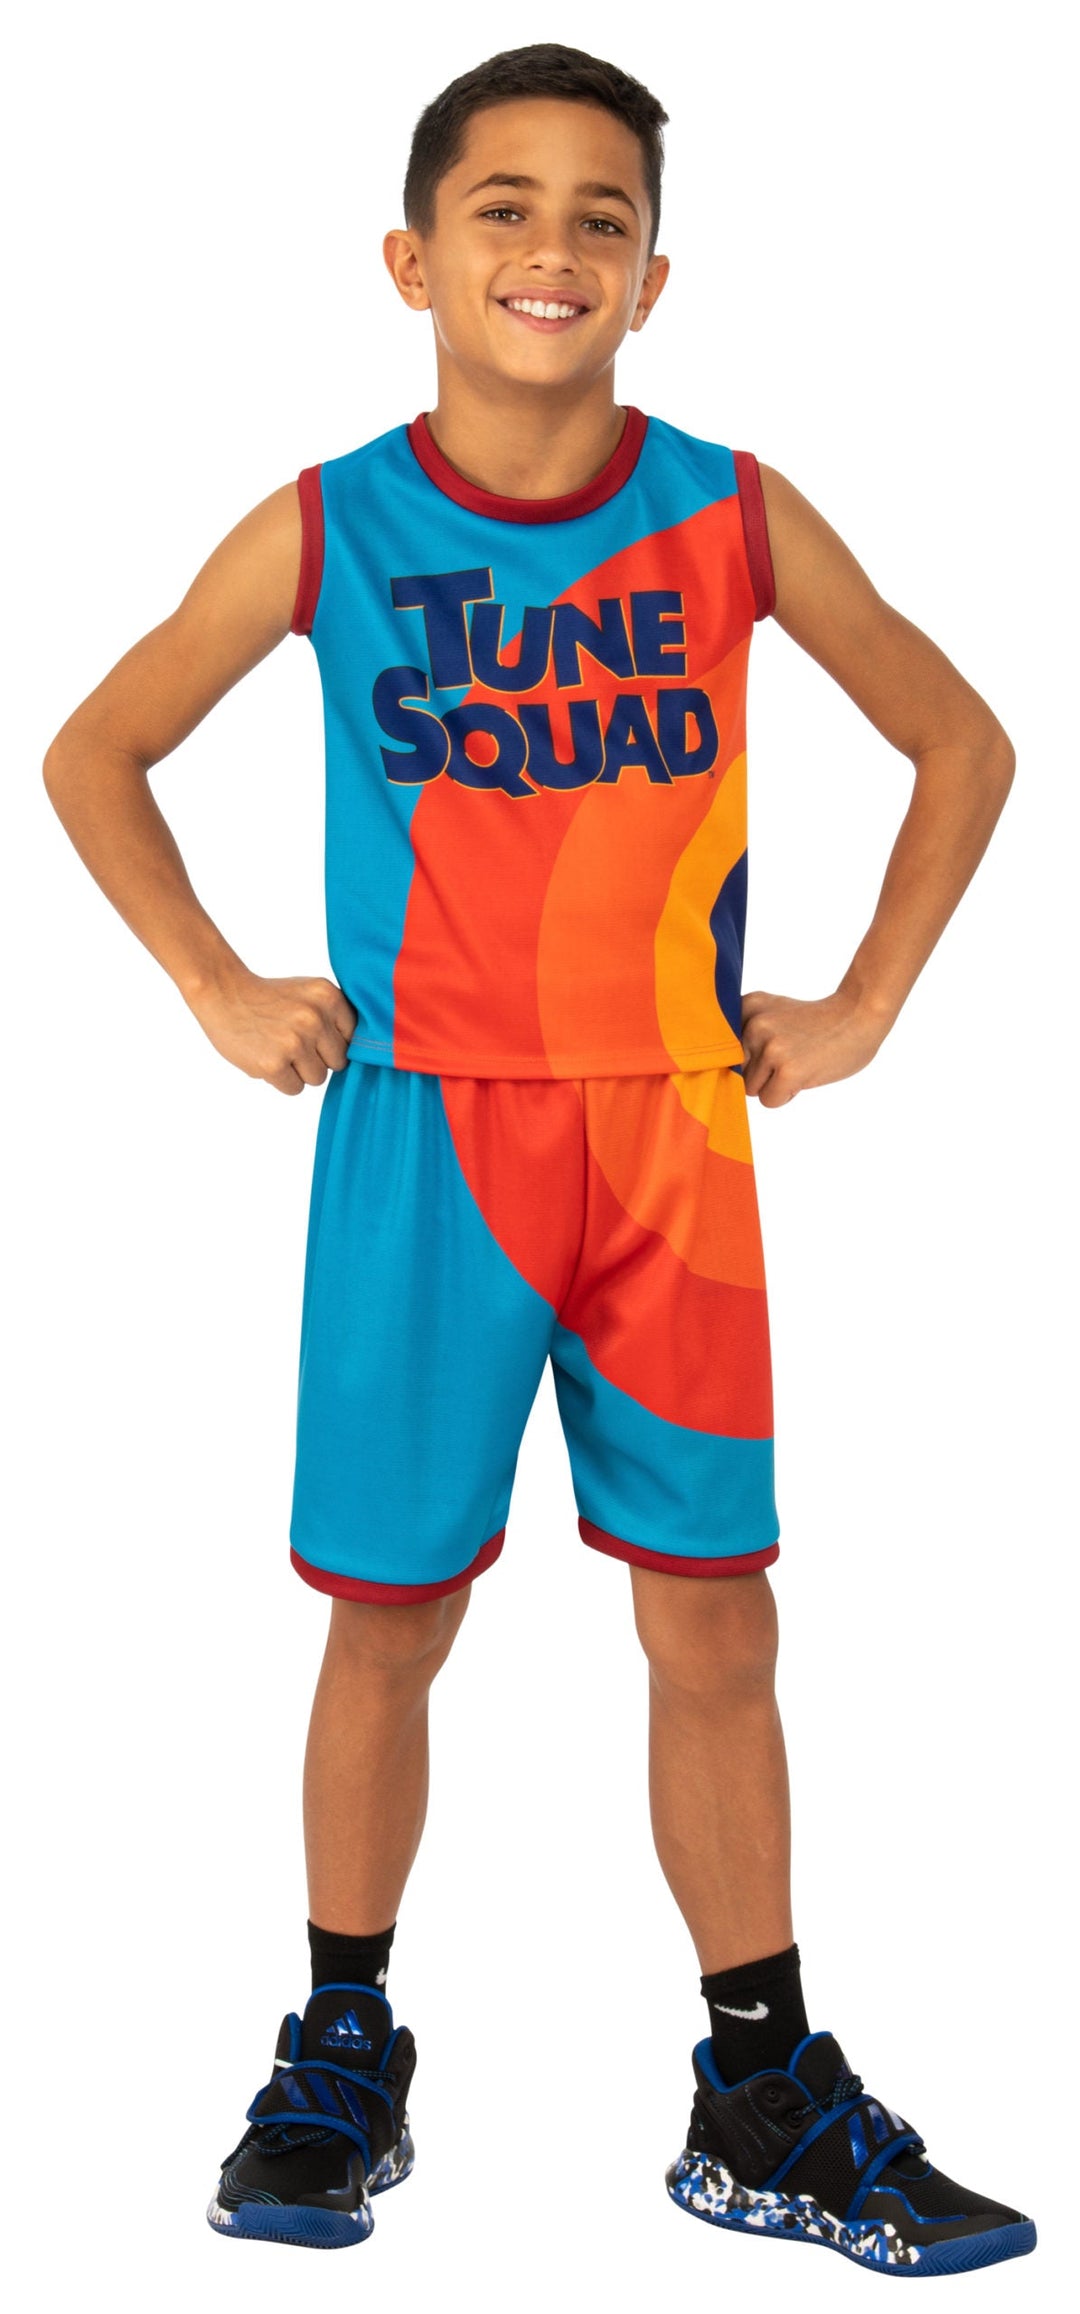 Space Jam Tune Squad Costume Basket Ball Uniform A New Legacy_1